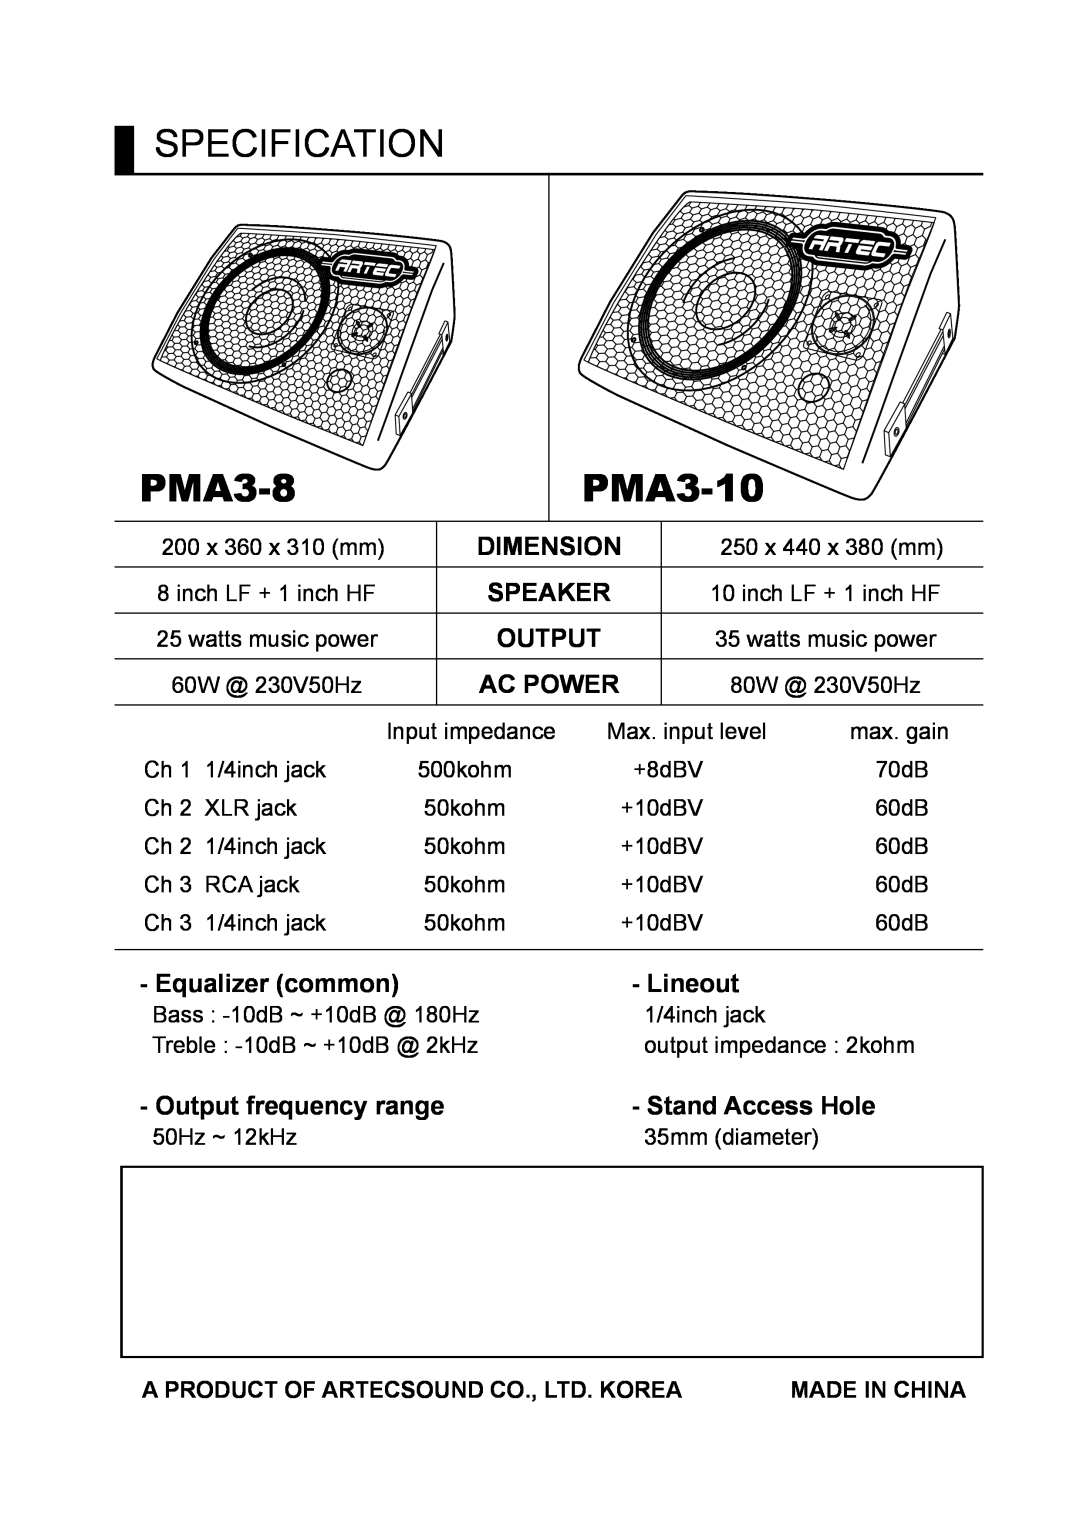 Artech USA PMA3-10 Specification, Ac Power, Equalizer common, Lineout, Output frequency range, Stand Access Hole, Speaker 